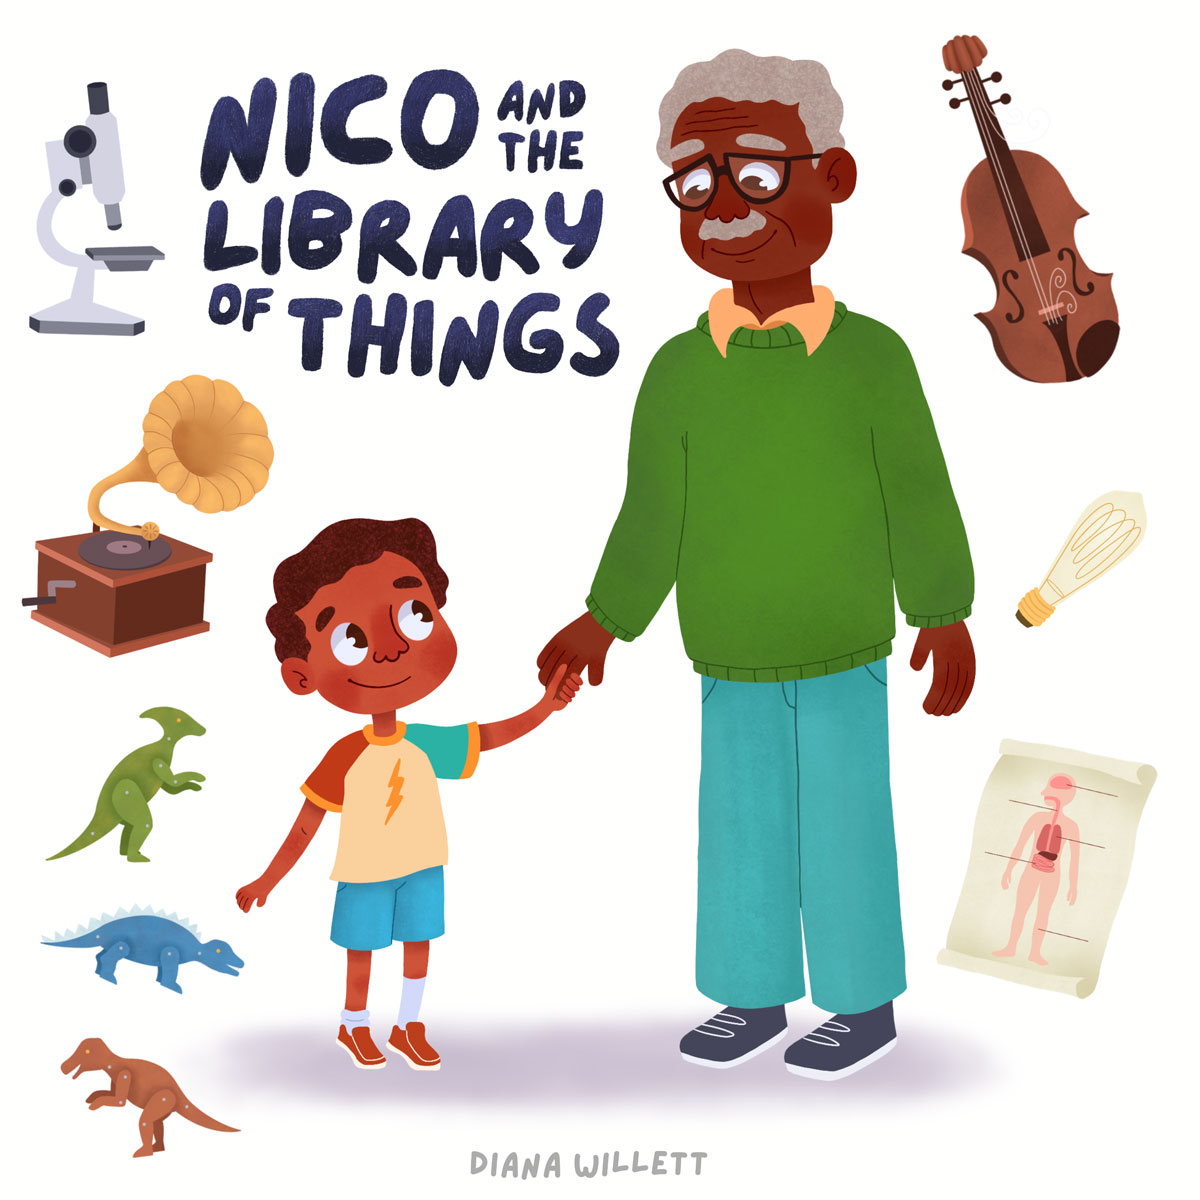 Kidlit Illustration by Diana Willett book cover of nico and grandpa library of things.